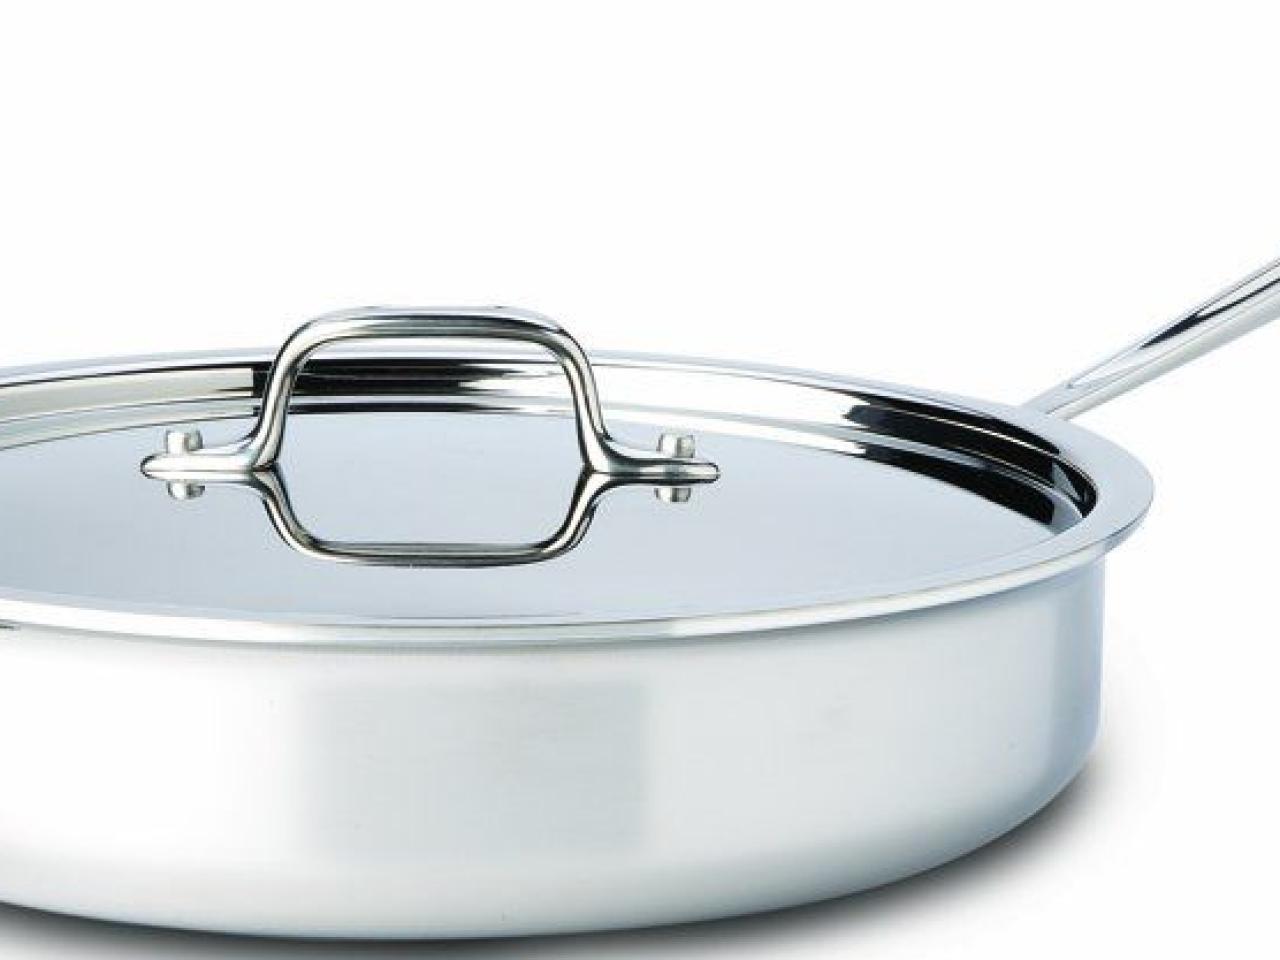 https://food.fnr.sndimg.com/content/dam/images/food/products/2020/3/16/rx_all-clad-3-quart-stainless-steel-saut-pan-with-lid.jpeg.rend.hgtvcom.1280.960.suffix/1584370624155.jpeg